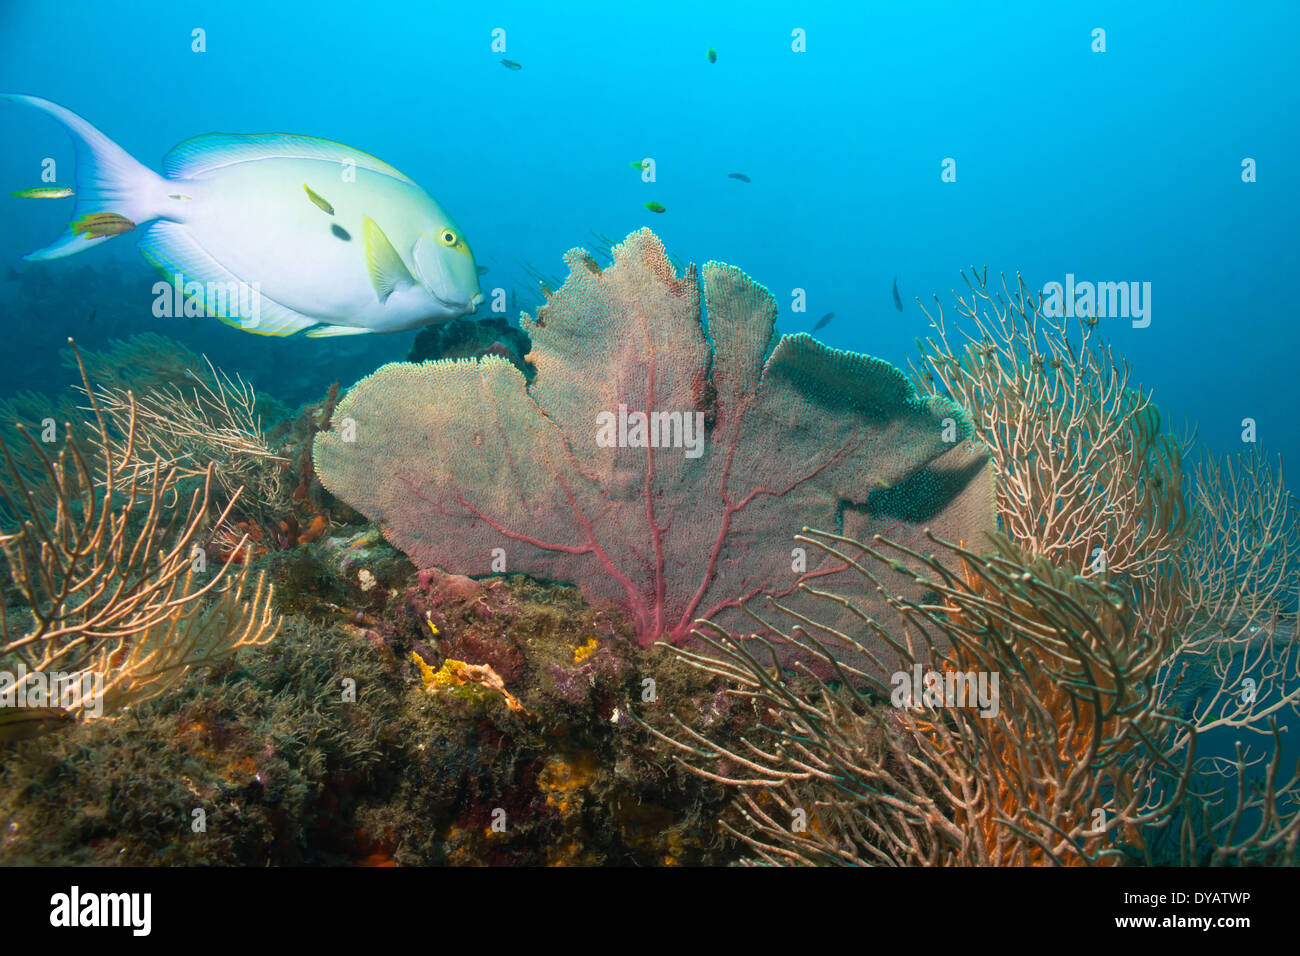 Yellowfin Surgeonfish (Acanthurus Xanthopterus) On a Coral Reef, Caño Island, Costa Rica Stock Photo